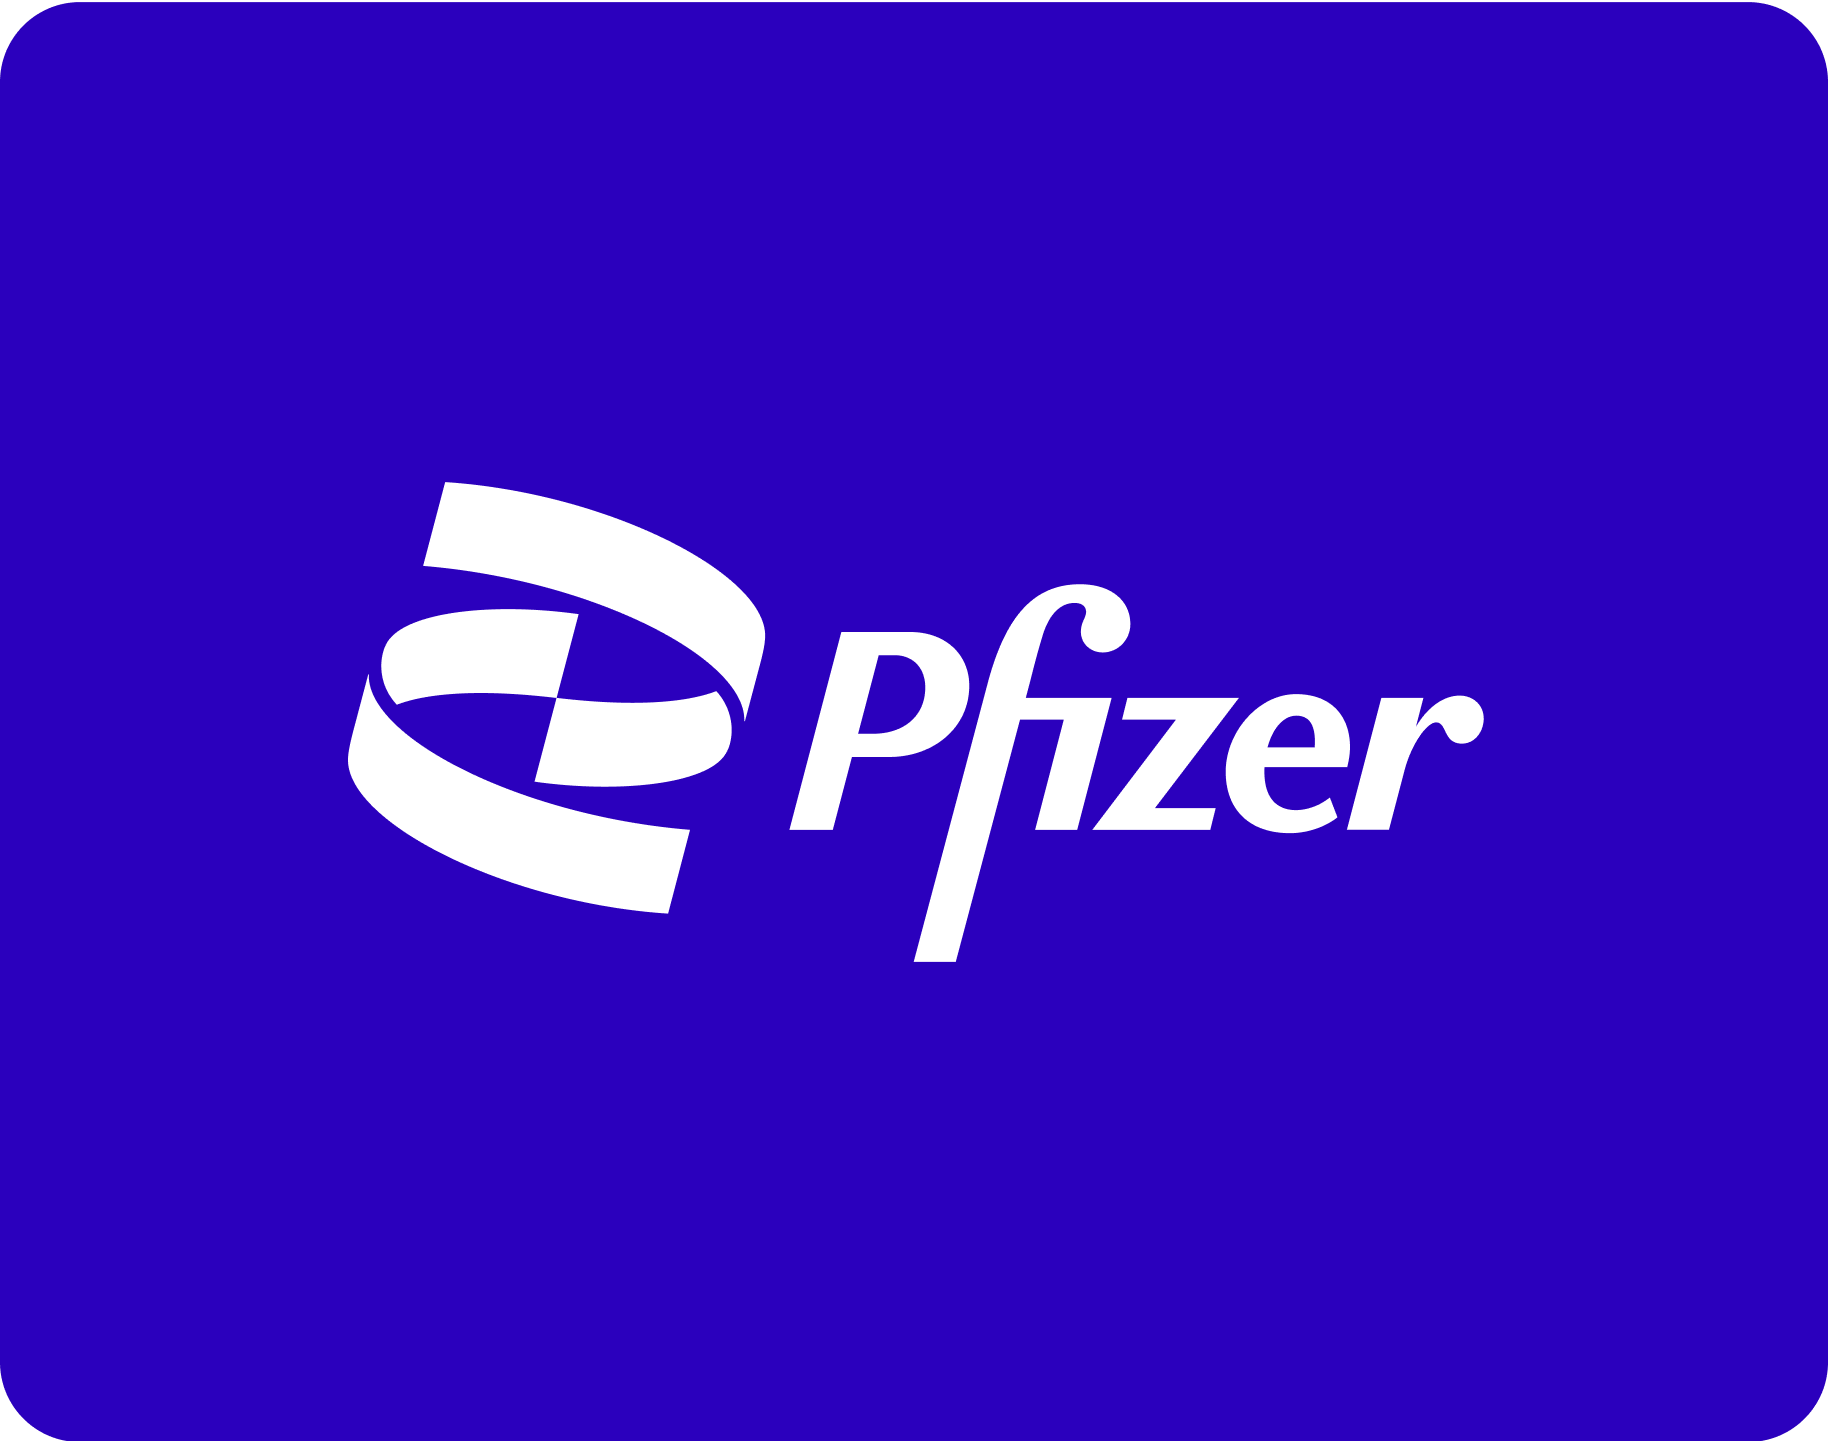 park-city-based-arena-pharmaceuticals-getting-bought-by-pfizer-for-6-7